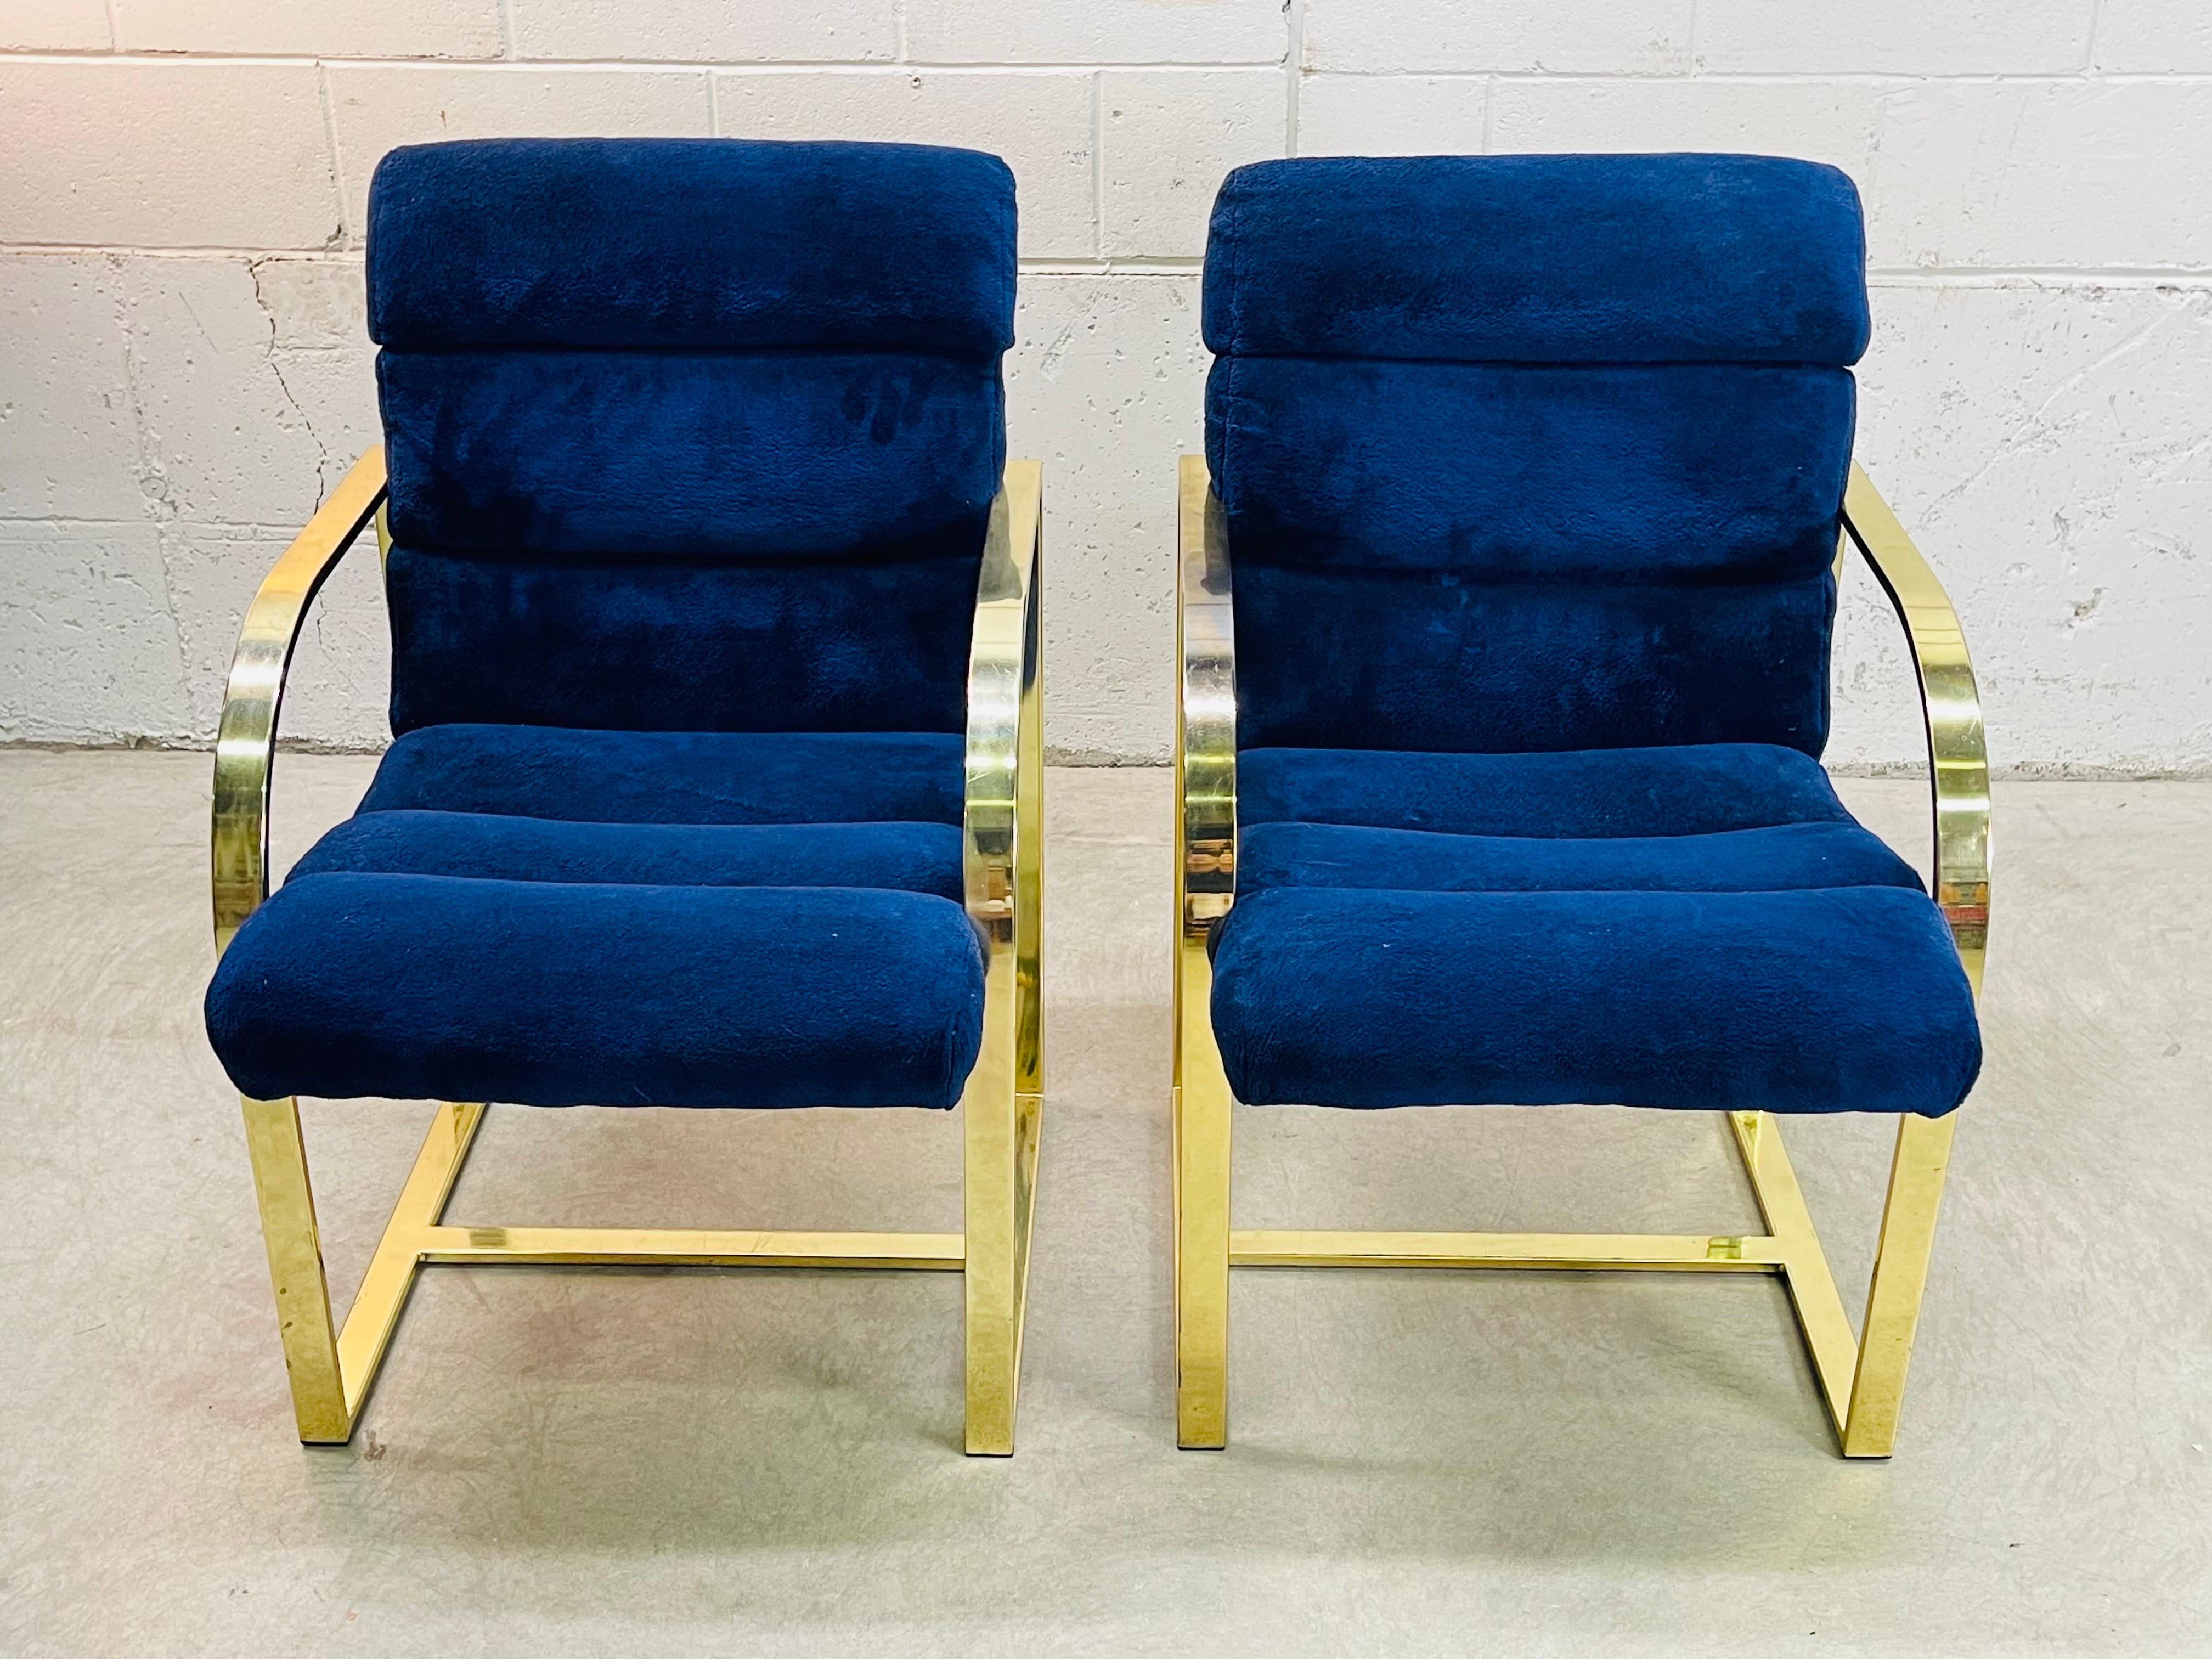 Vintage 1970s pair of flat bar dining chairs designed by Milo Baughman for Thayer Coggin. The chairs are in very good original condition in gold metal with royal blue fabric. Fabric is in very good condition with no stains or rips. These chairs are